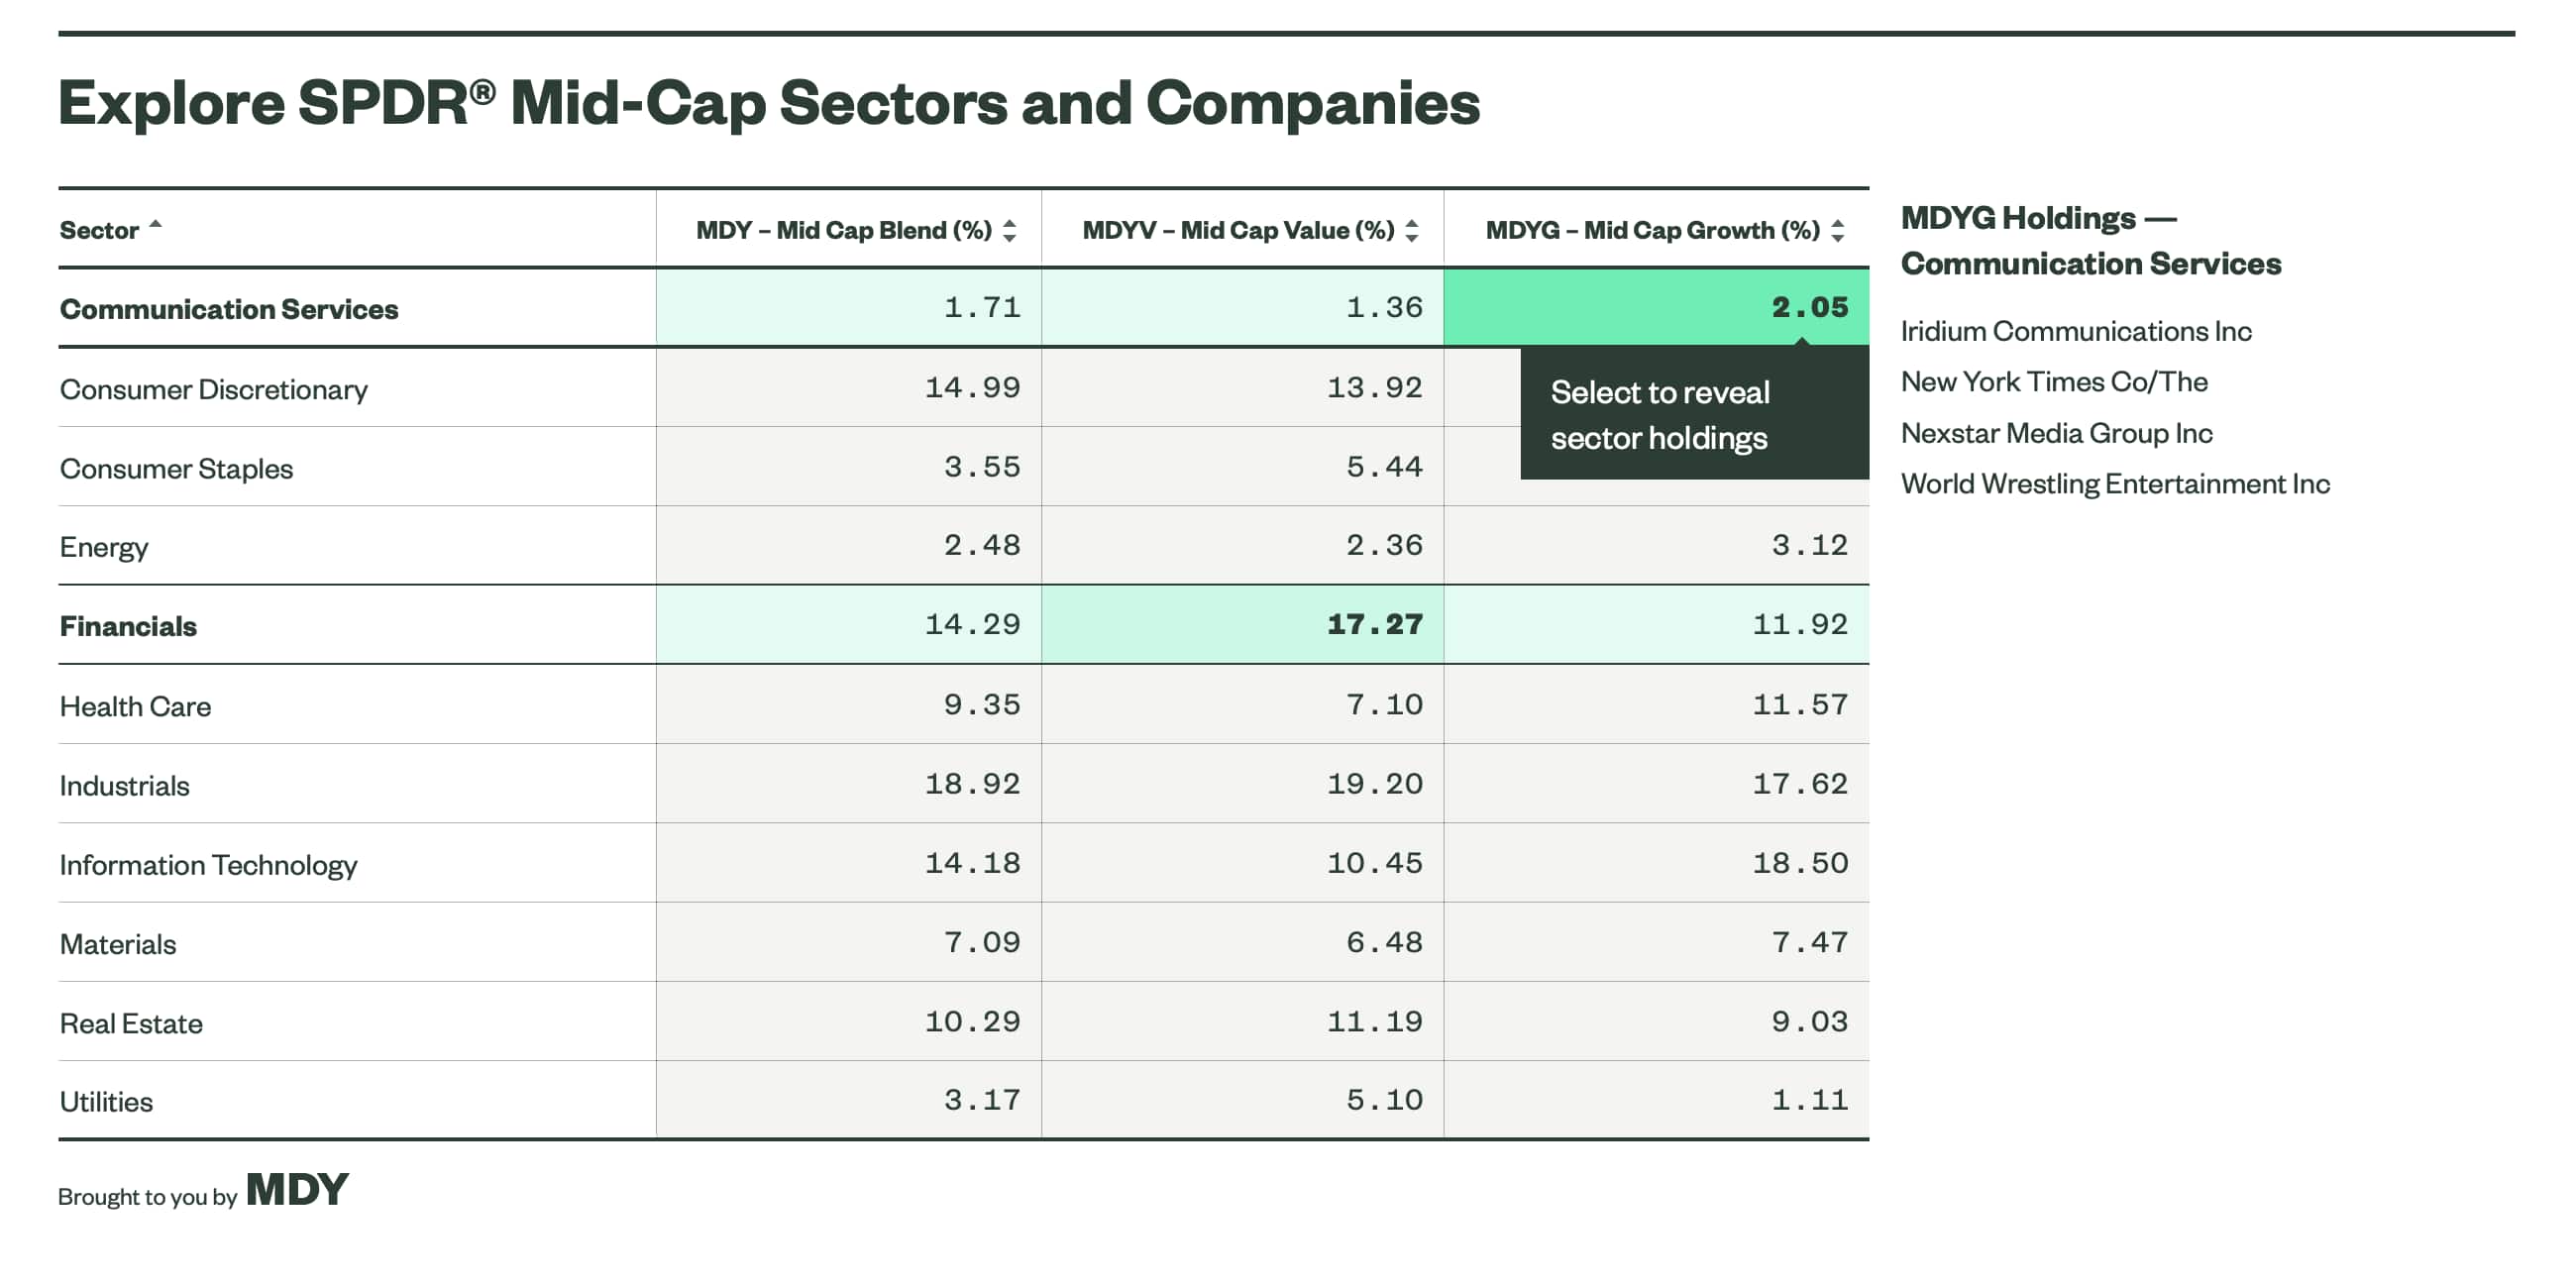 Adding mid caps to portfolios can boost returns. Explore the company compositions for mid-cap blend, value, and growth ETFs to implement a mid-cap allocation.